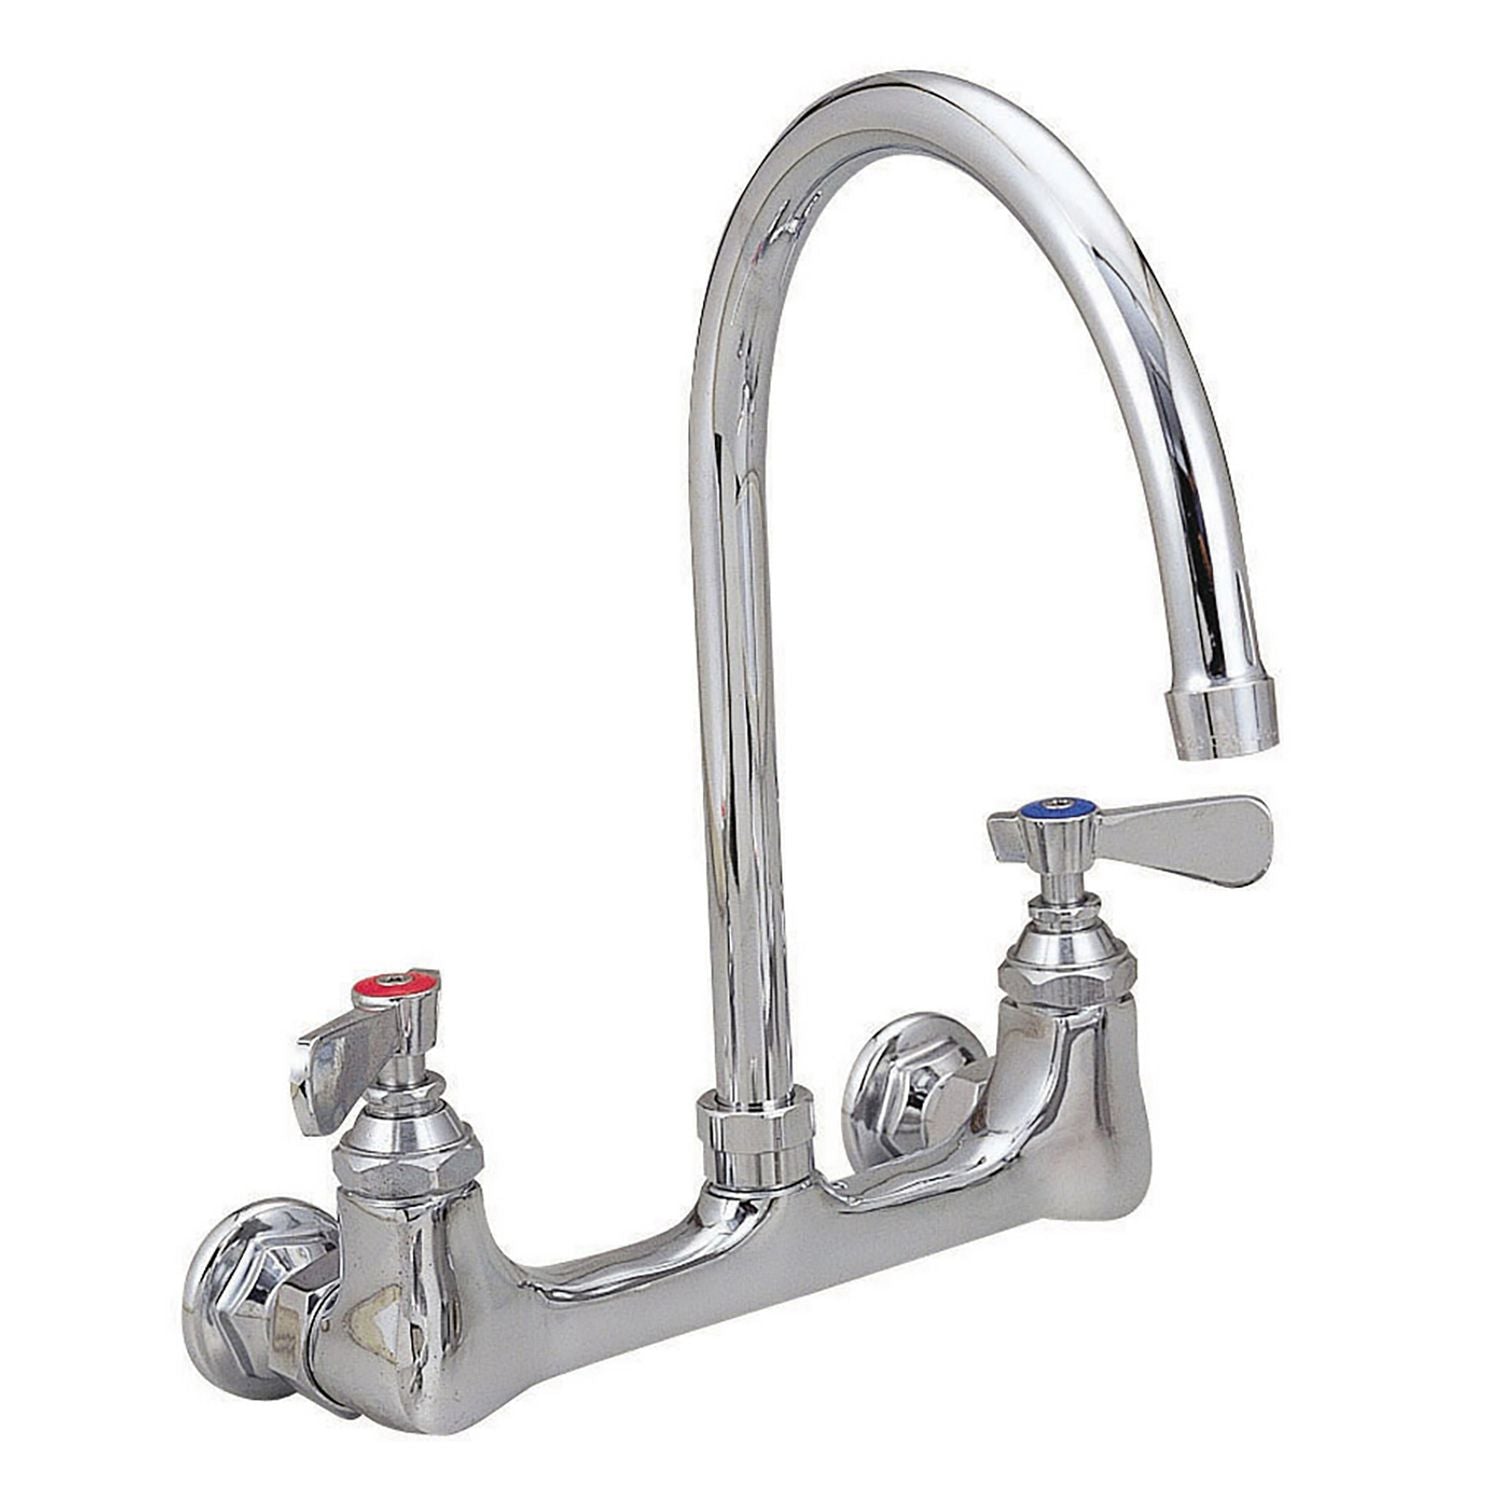 workforce-standard-duty-faucet-788-height-3-reach-chrome-plated-brass-ships-in-4-6-business-days_bkebkfw3gm - 1